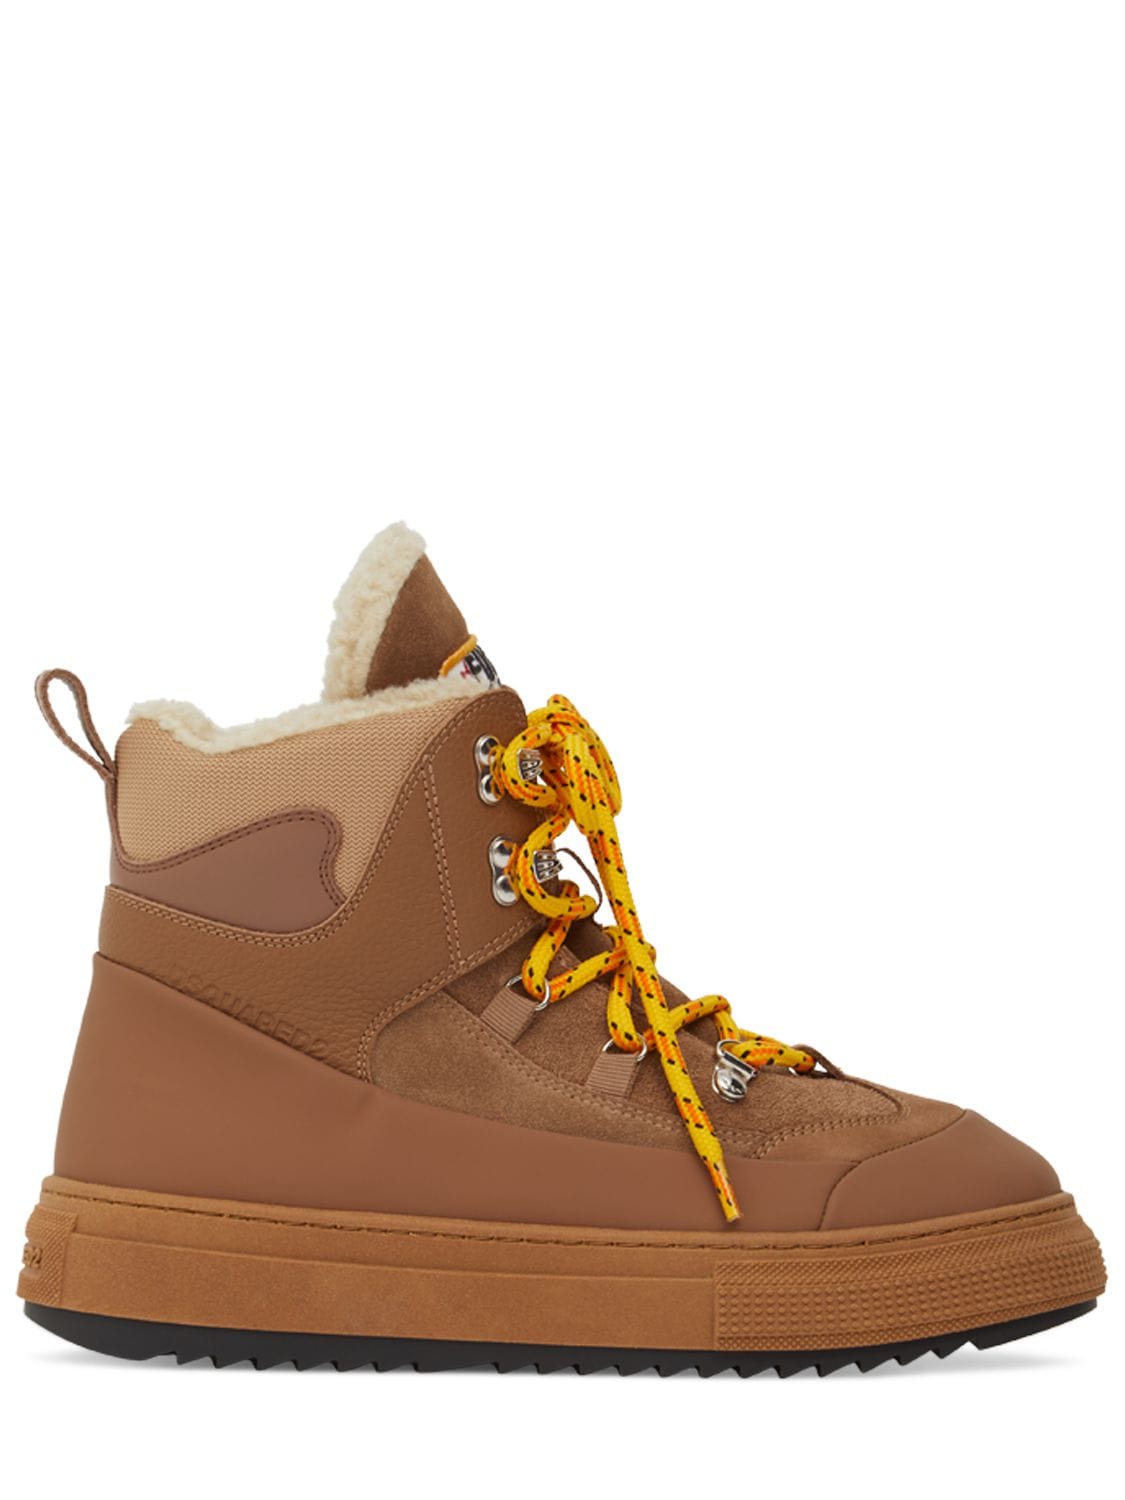 DSQUARED2 BOOGIE SUEDE HIGH TOP SNEAKERS